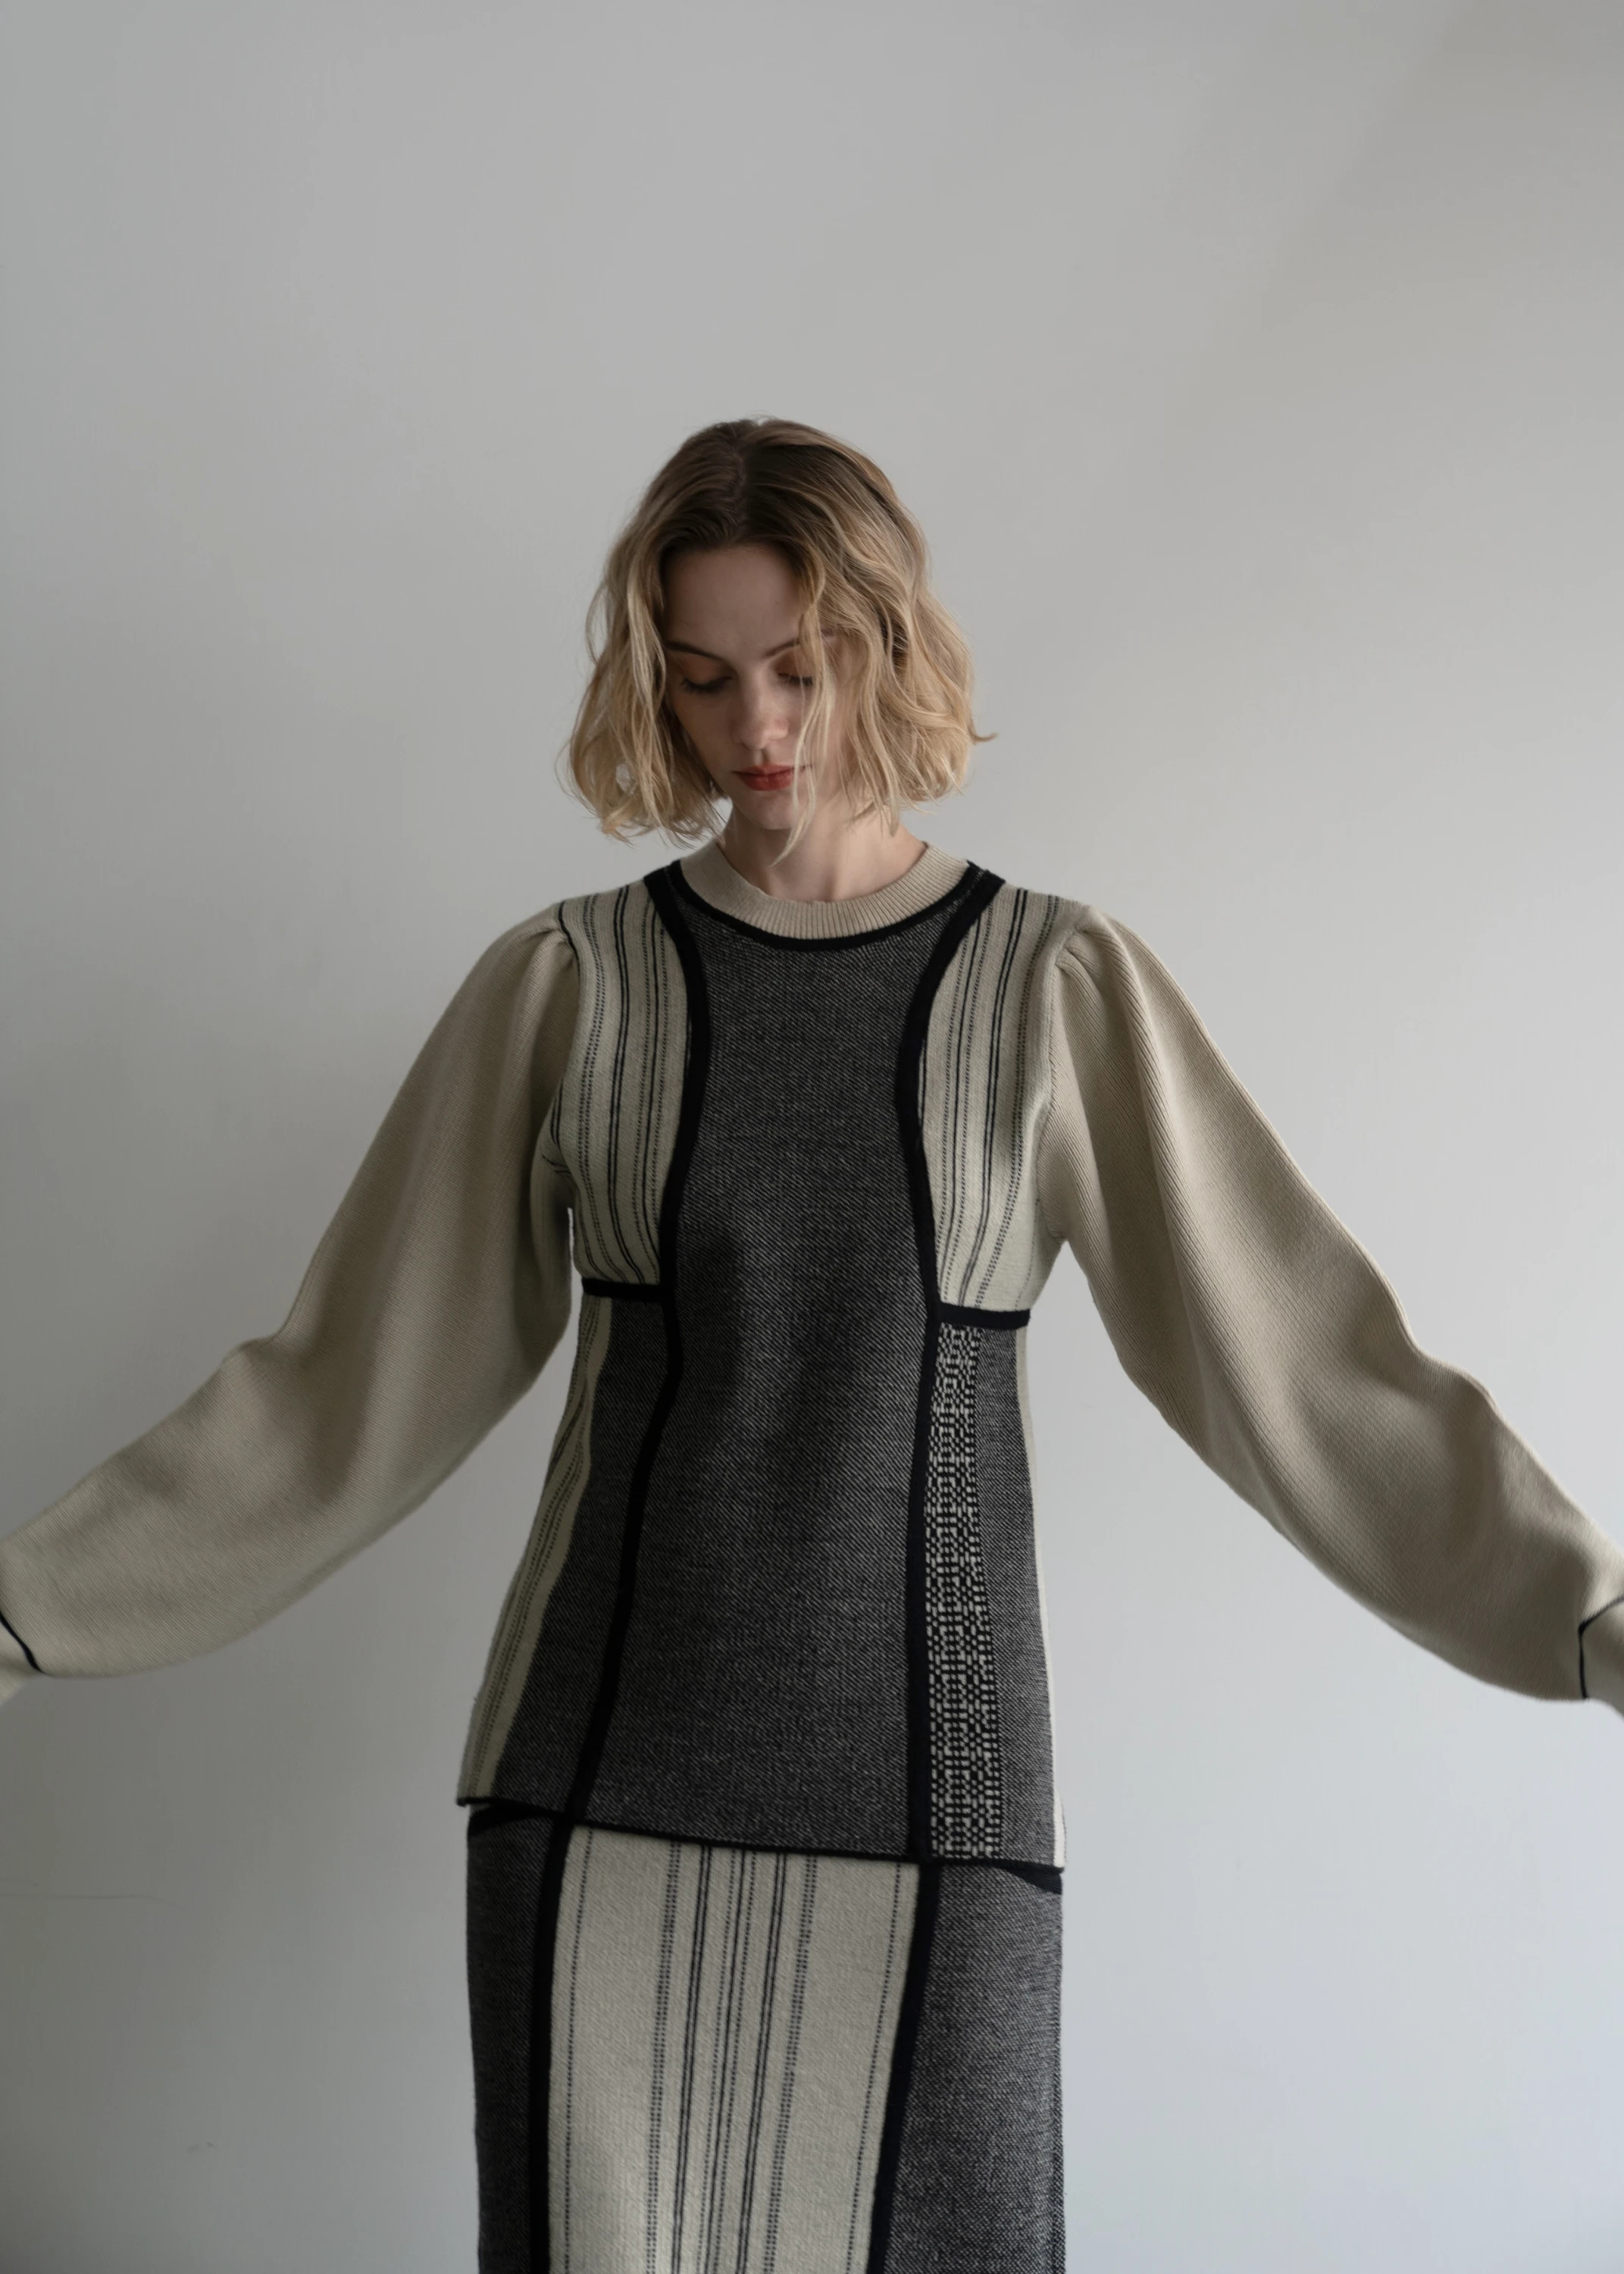 jacquard undulate placement knit / willfully（ウィルフリー）のknit